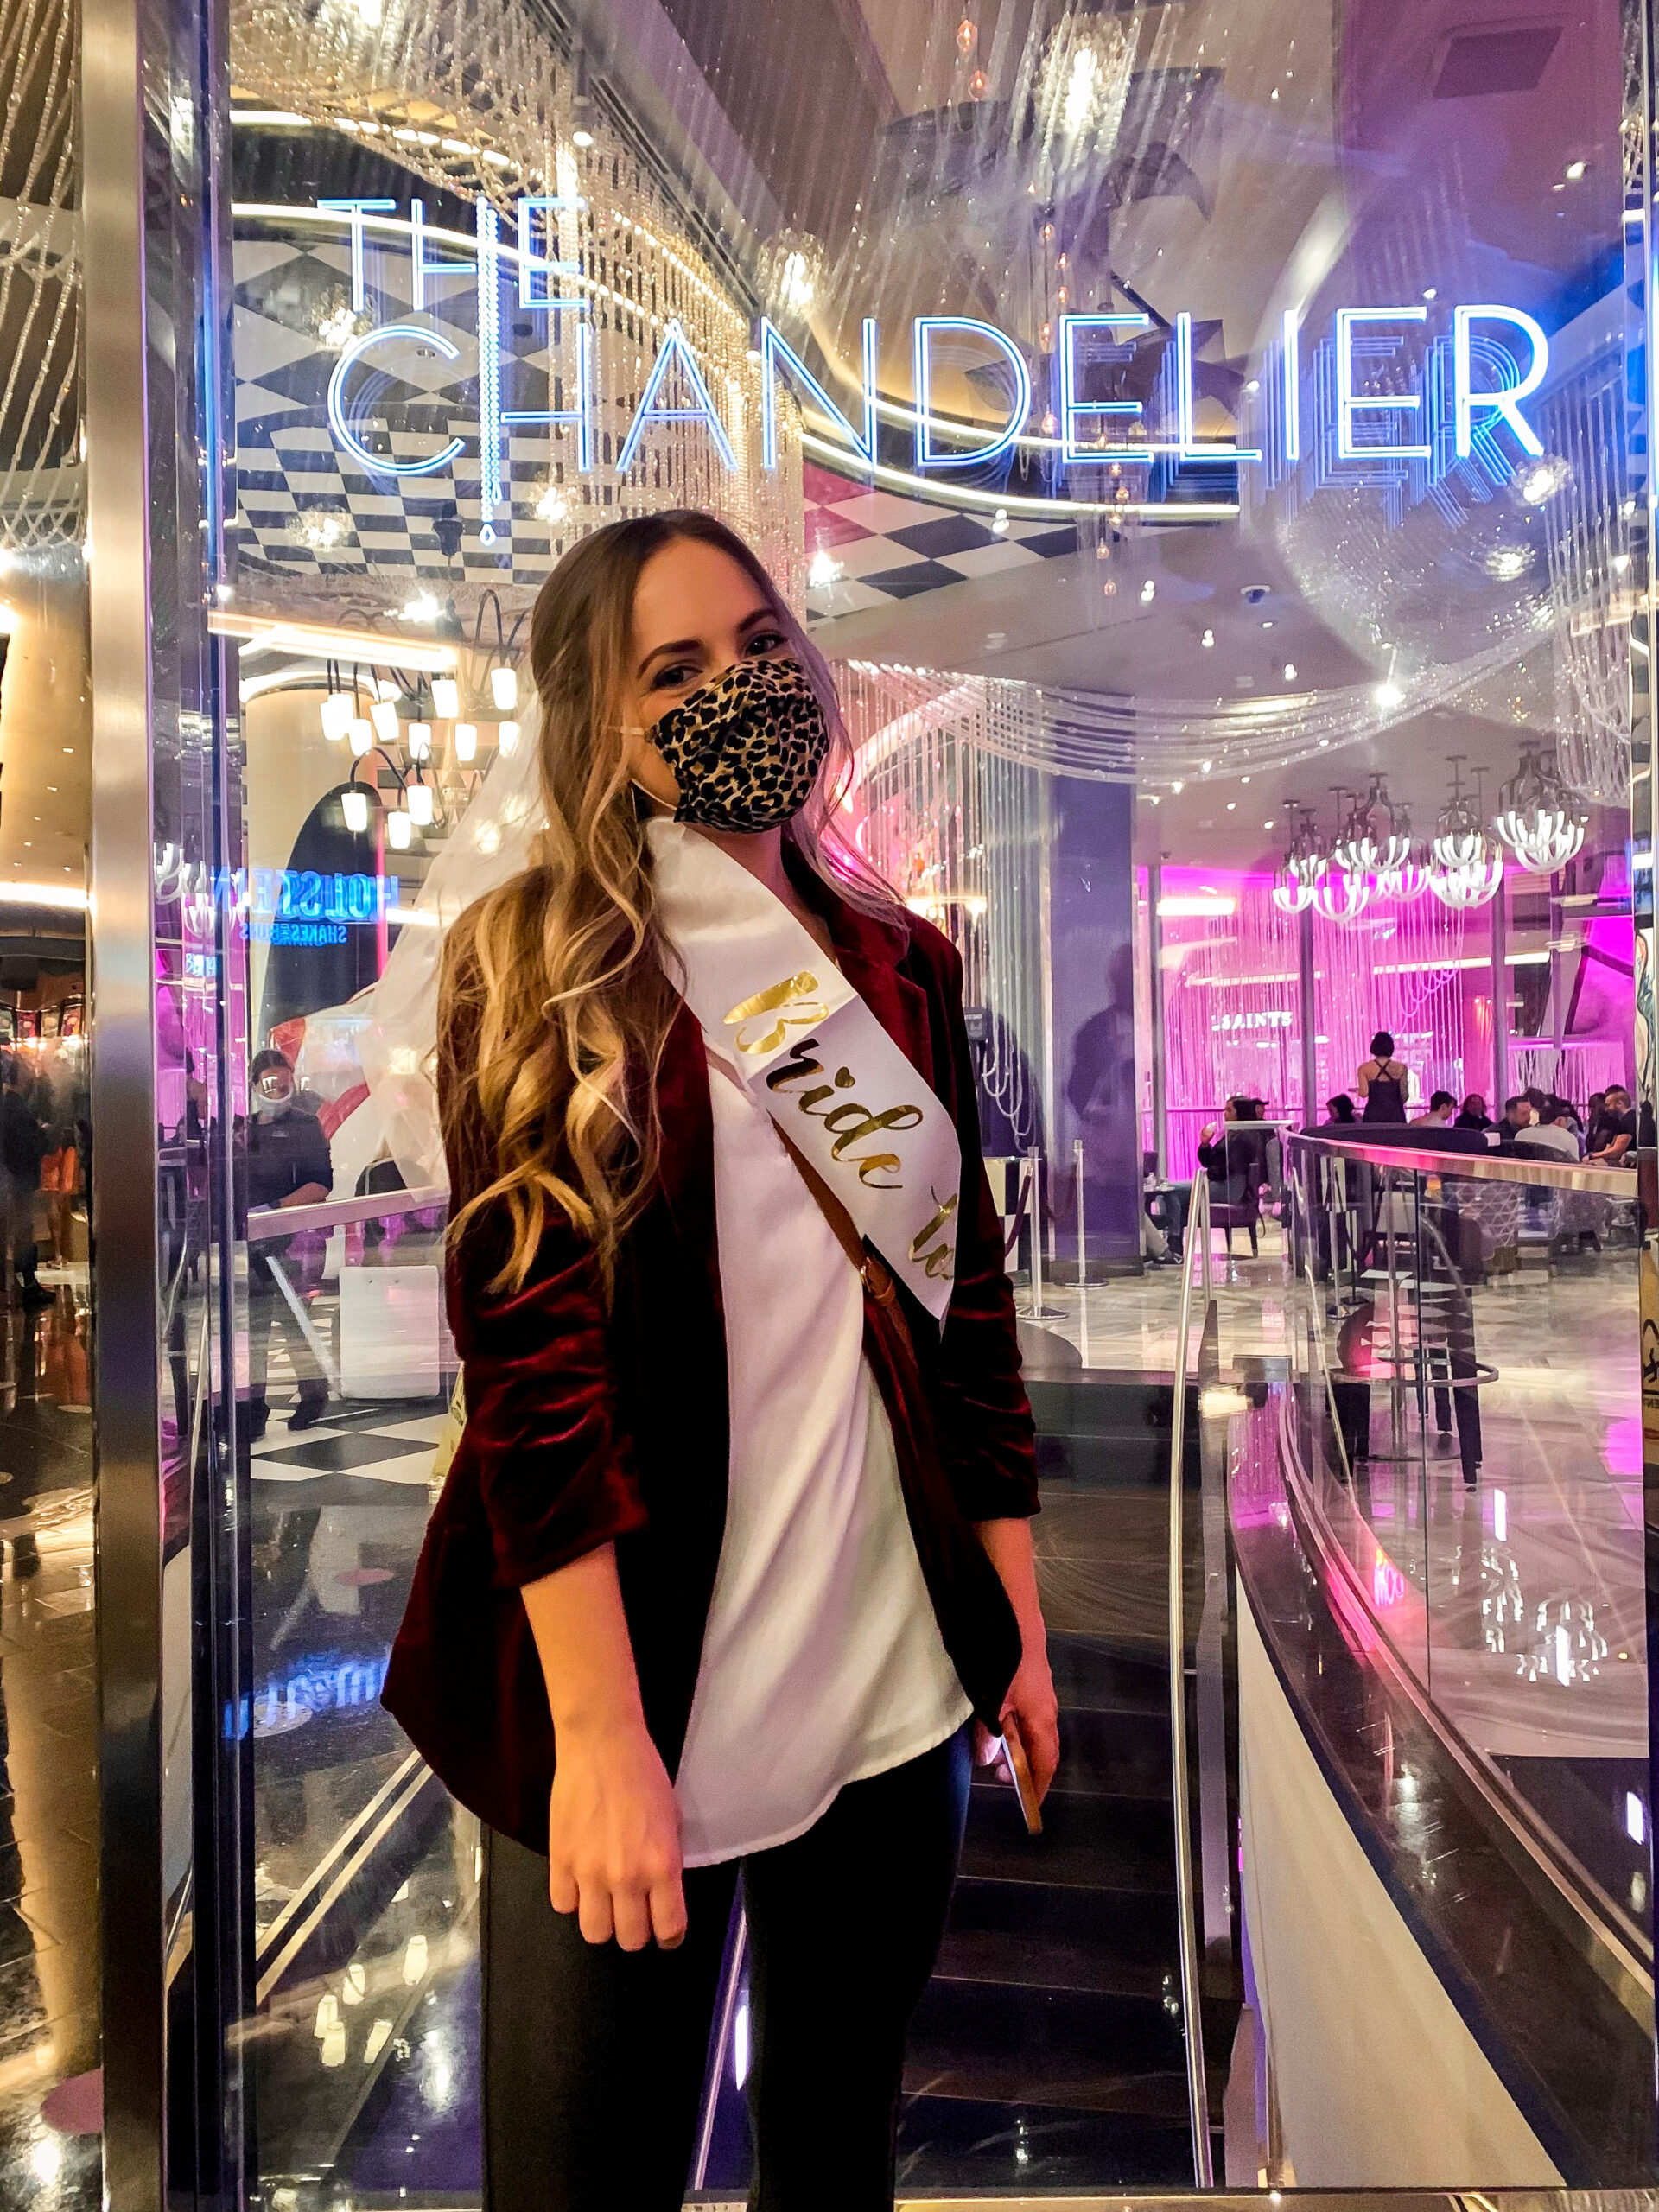 Blonde girl with mask standing in from of The Chandelier bar entry sign at the Cosmopolitan Hotel in Las Vegas for a bachelorette party.